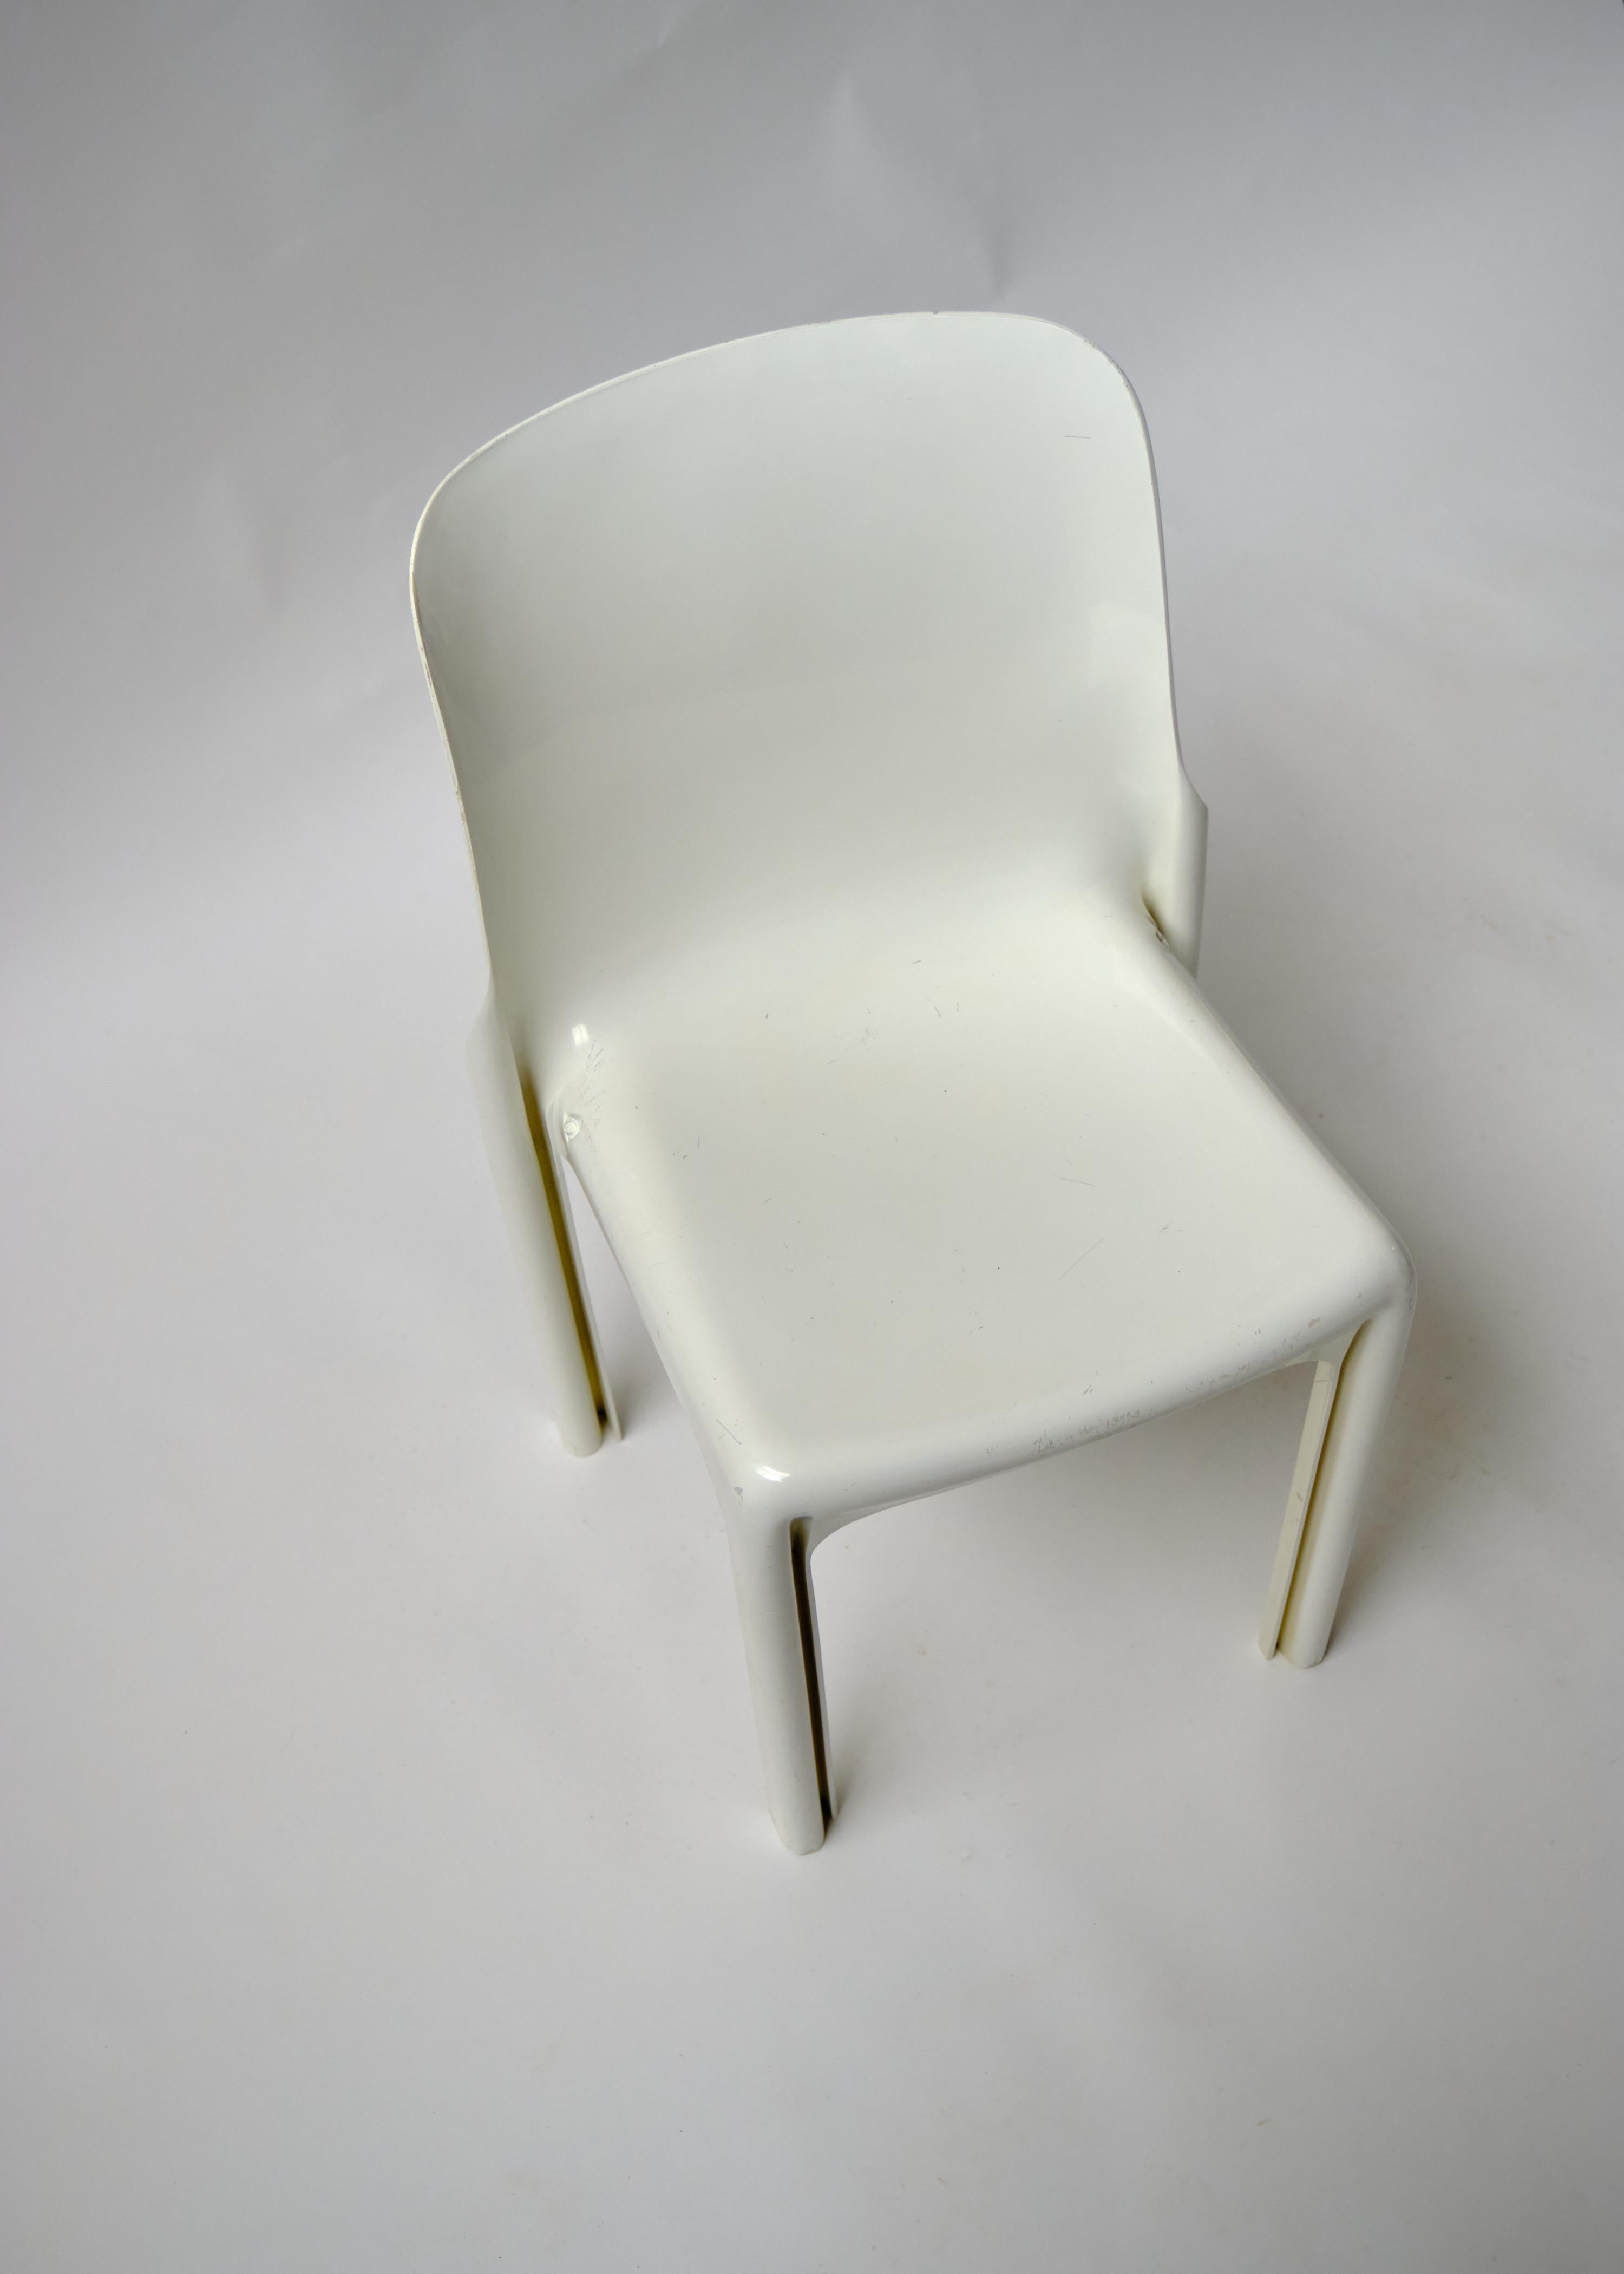 Italian White Stackable Selene Chairs by Vico Magistretti for Artemide, Pair For Sale